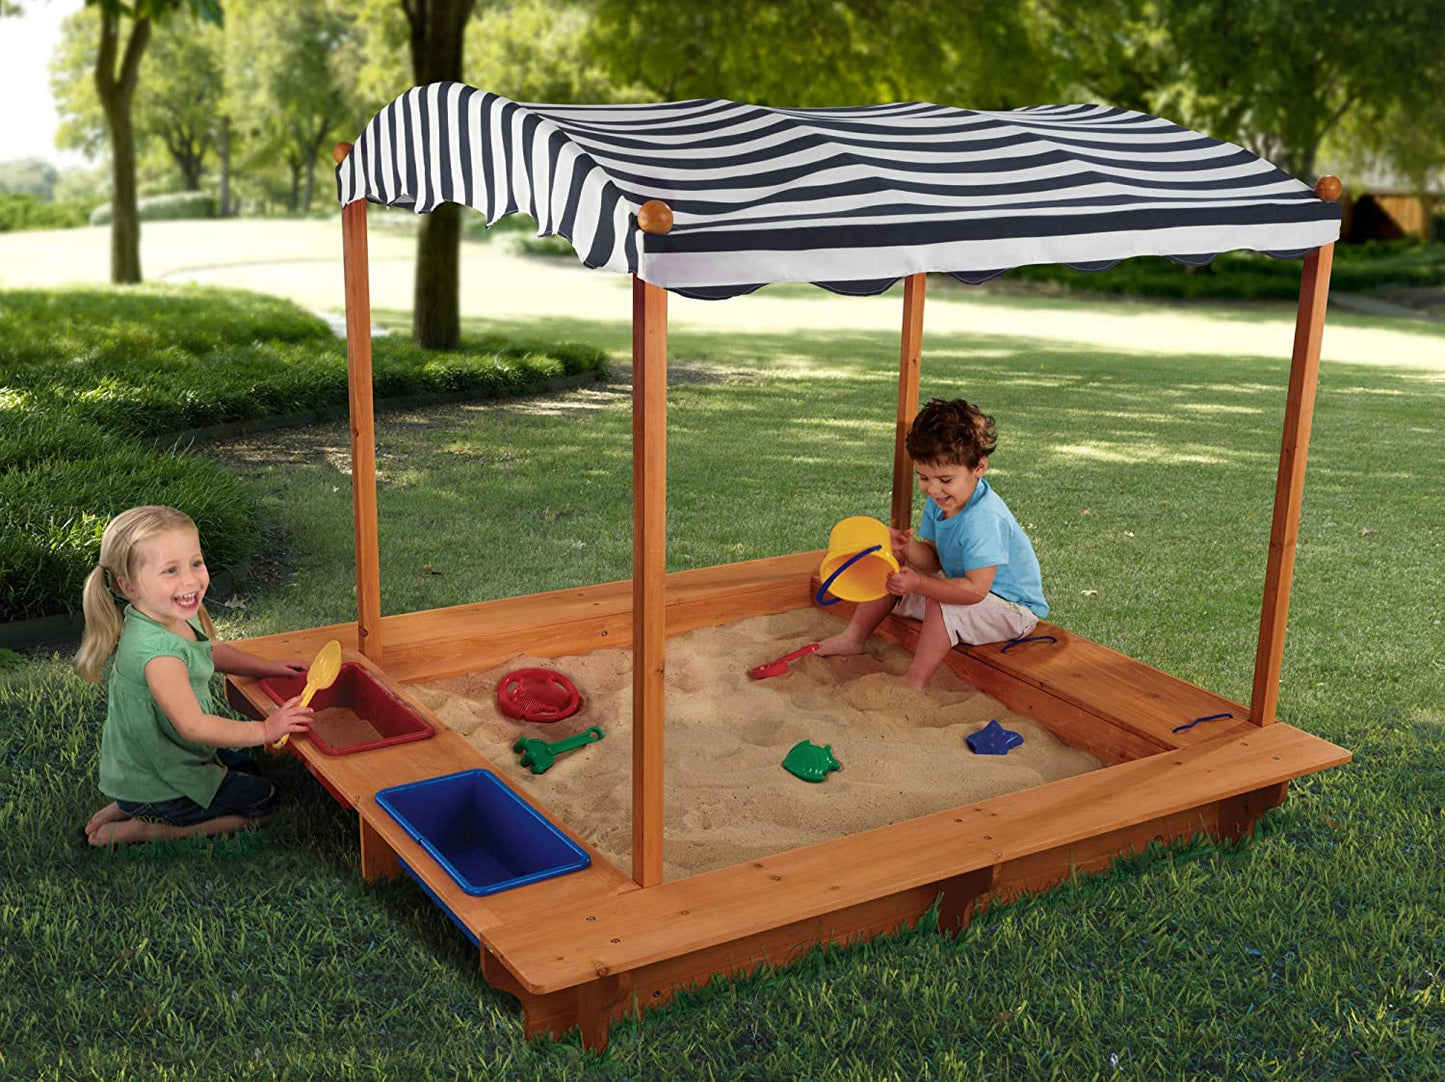 Outdoor Covered Wooden Sandbox with Bins and Striped Canvas Canopy, Navy & White